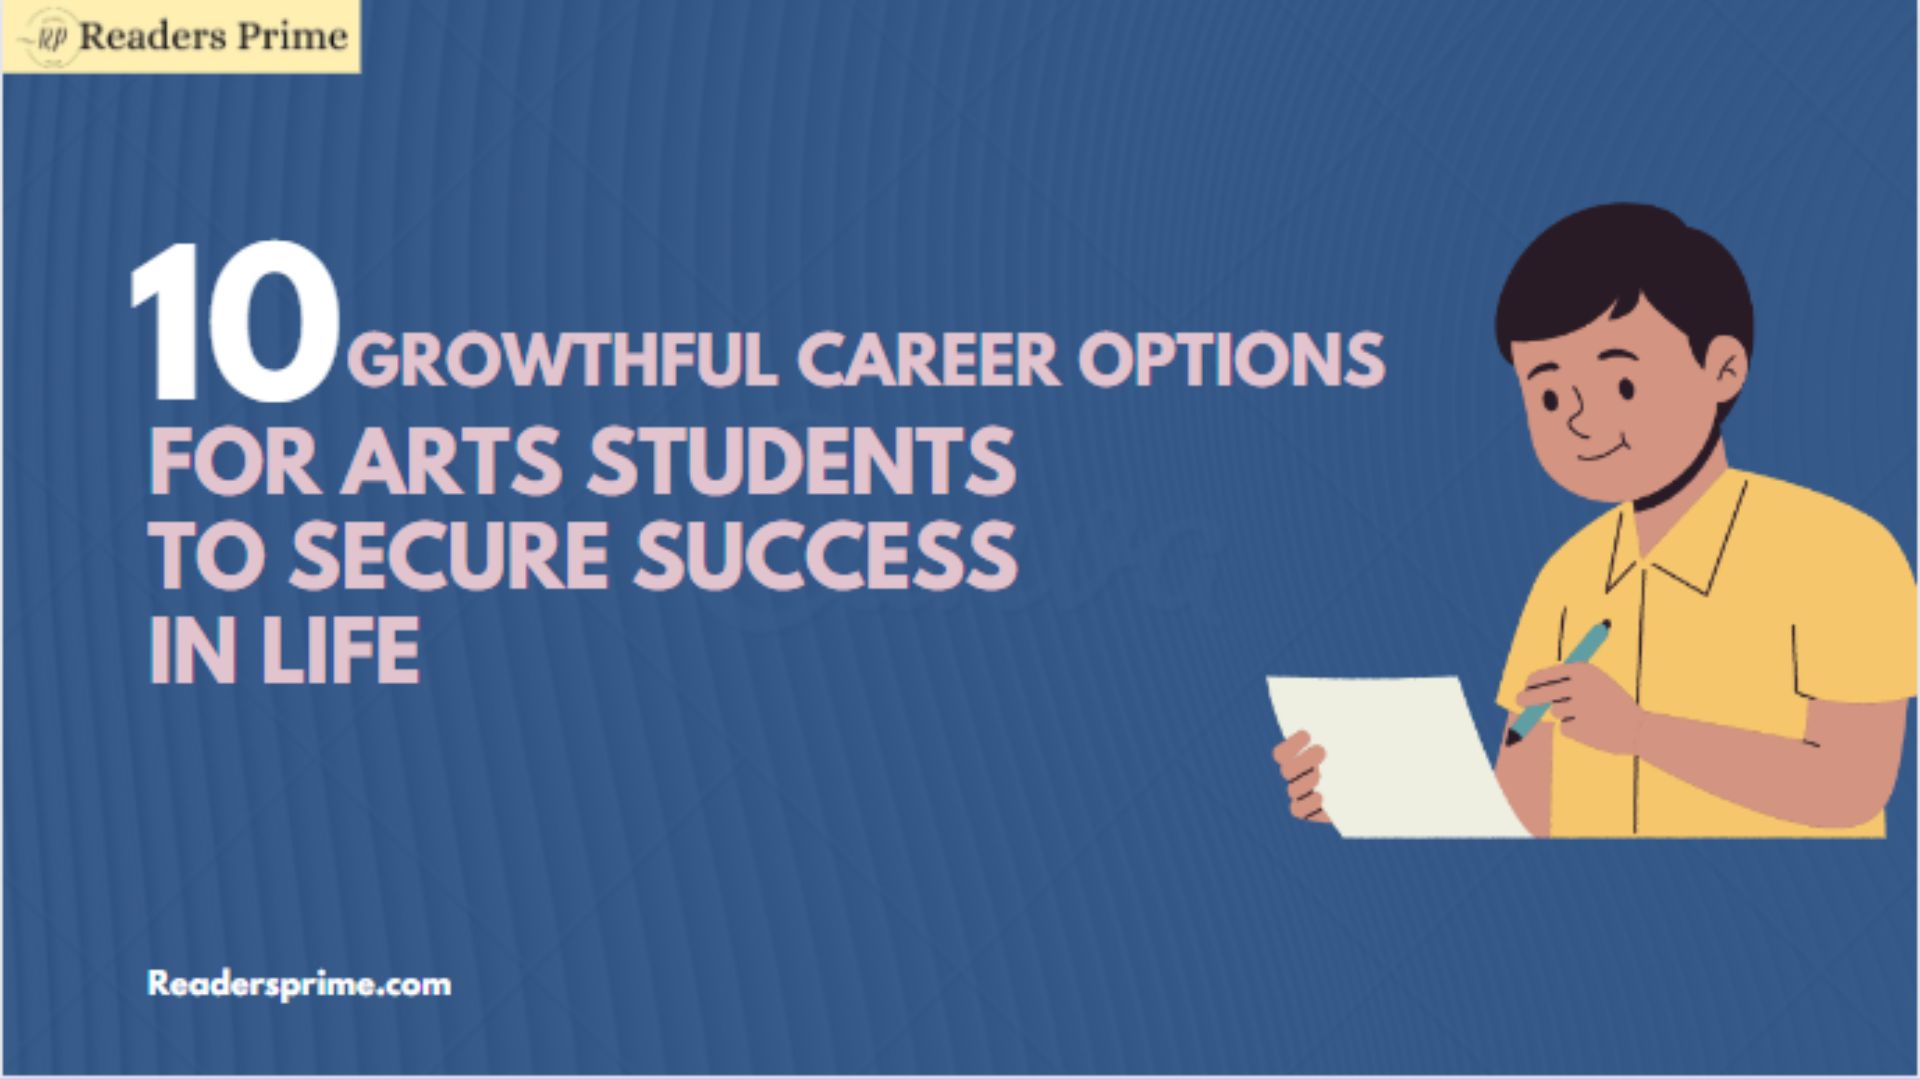 10 Growthful Career Options for Arts Students to Secure Success in Life